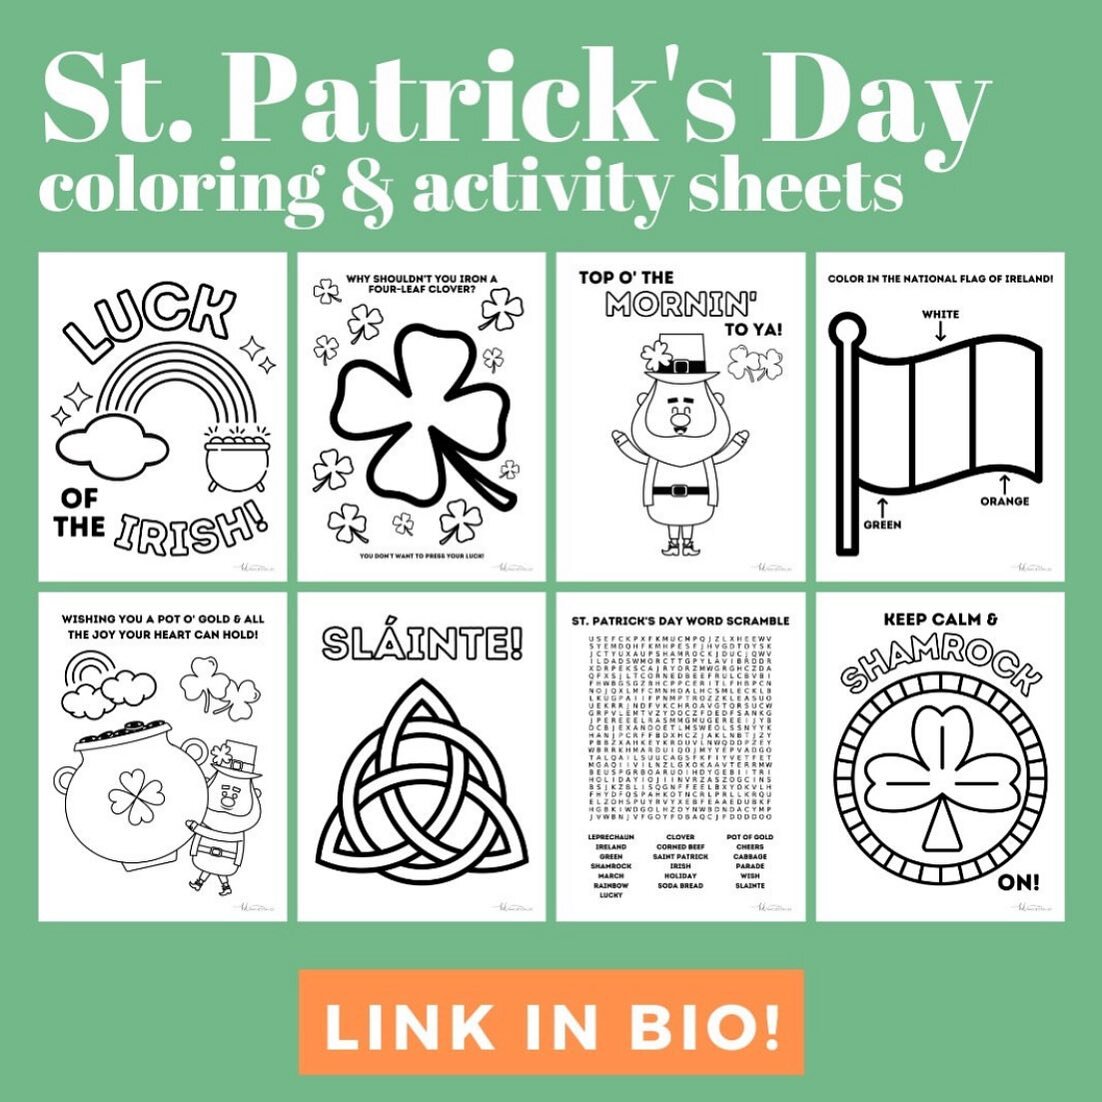 Be the life of the paddy this St. Patrick&rsquo;s Day with 10 festive coloring pages, activity sheets, word searches, and more! ☘️🖍️

&gt;&gt; Print them @ the link in bio!

...
#stpatricksday #irish #kissmeimirish #actuallyimnotlol #teacherresource